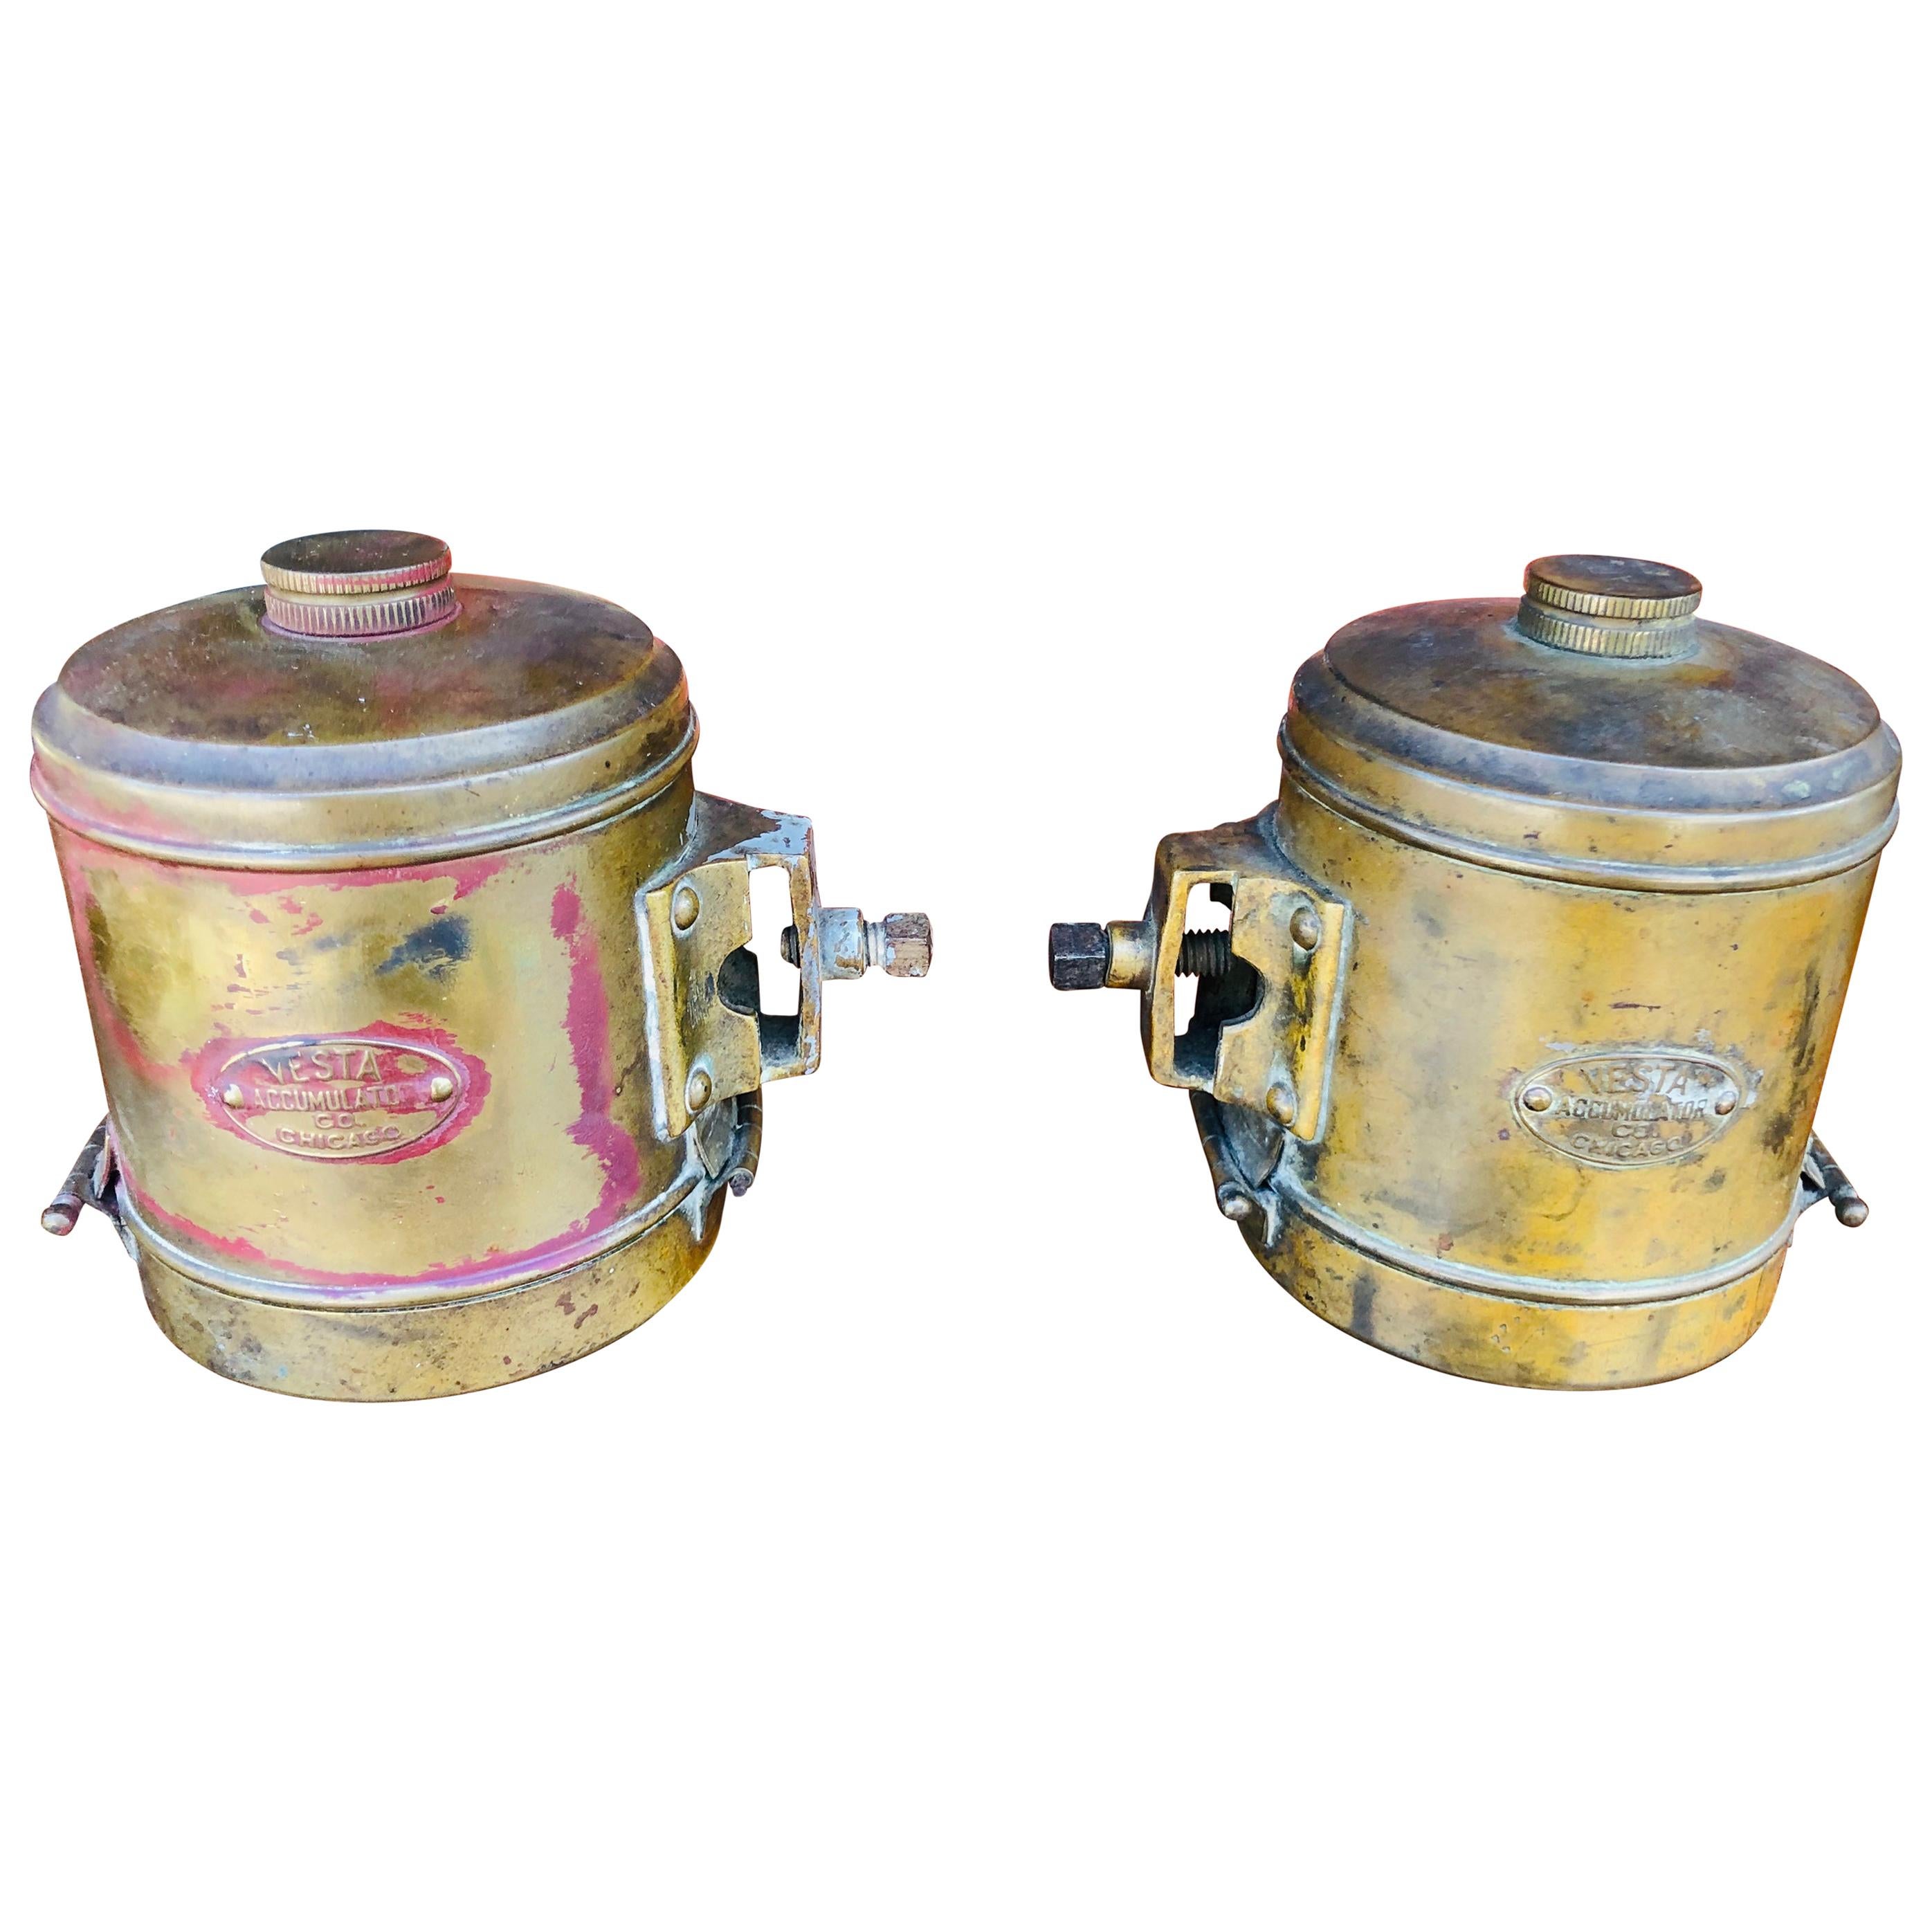 Pair of Small Brass Auto Lights by the Vesta Accumulator Co or Chicago